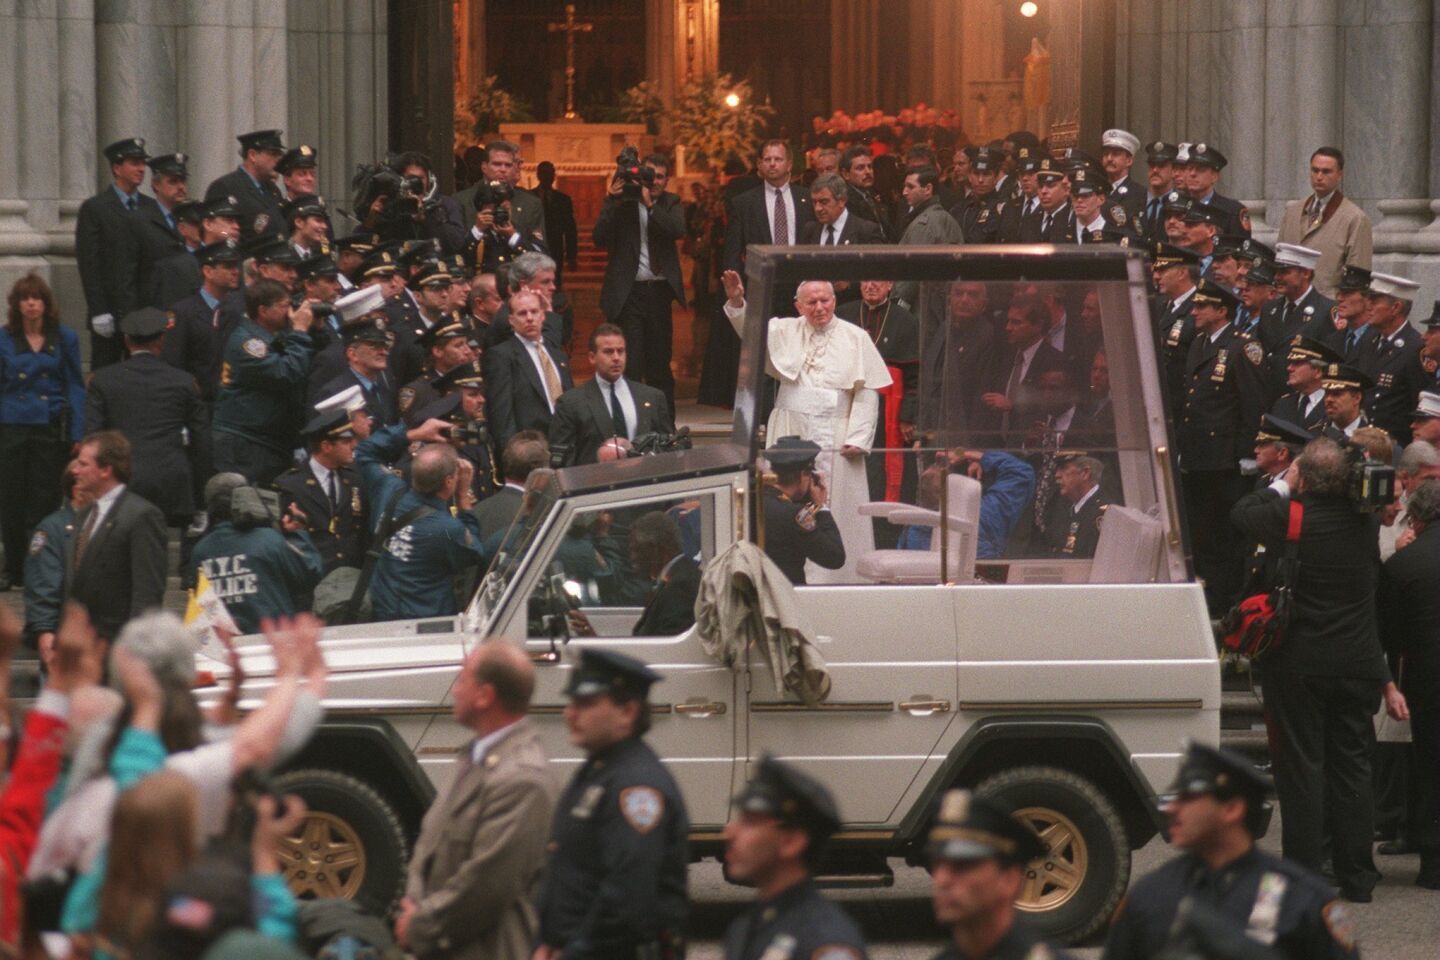 Pope John Paul II at St. Patrick's Cathedral